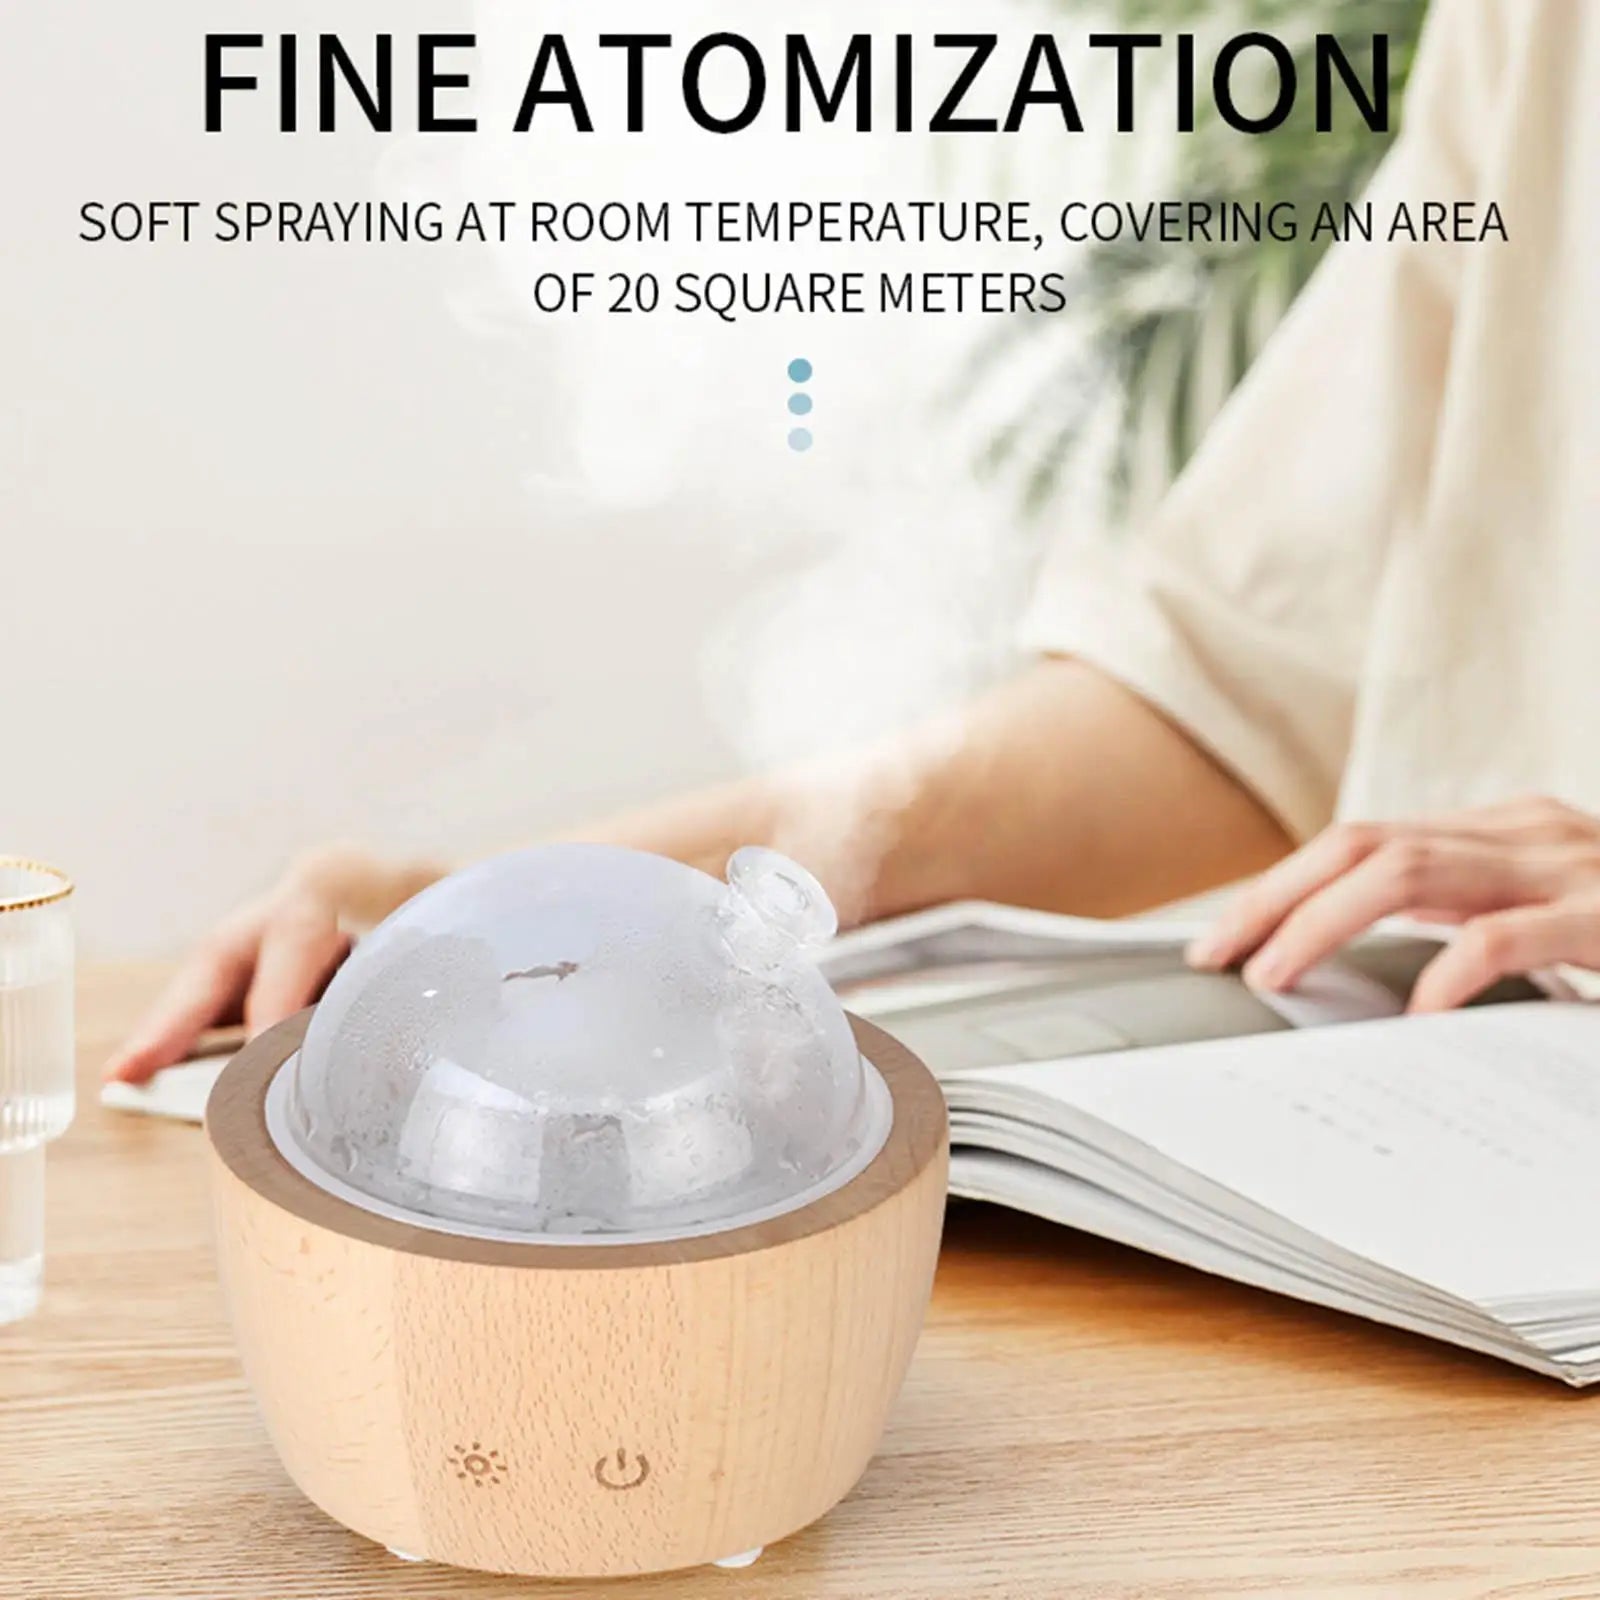 Glass Essential Oil Diffuser Humidifier Sprayer Portable Home Bedroom Large Room Fragrance Perfumes Diffuser for Yoga Office ShopOnlyDeal